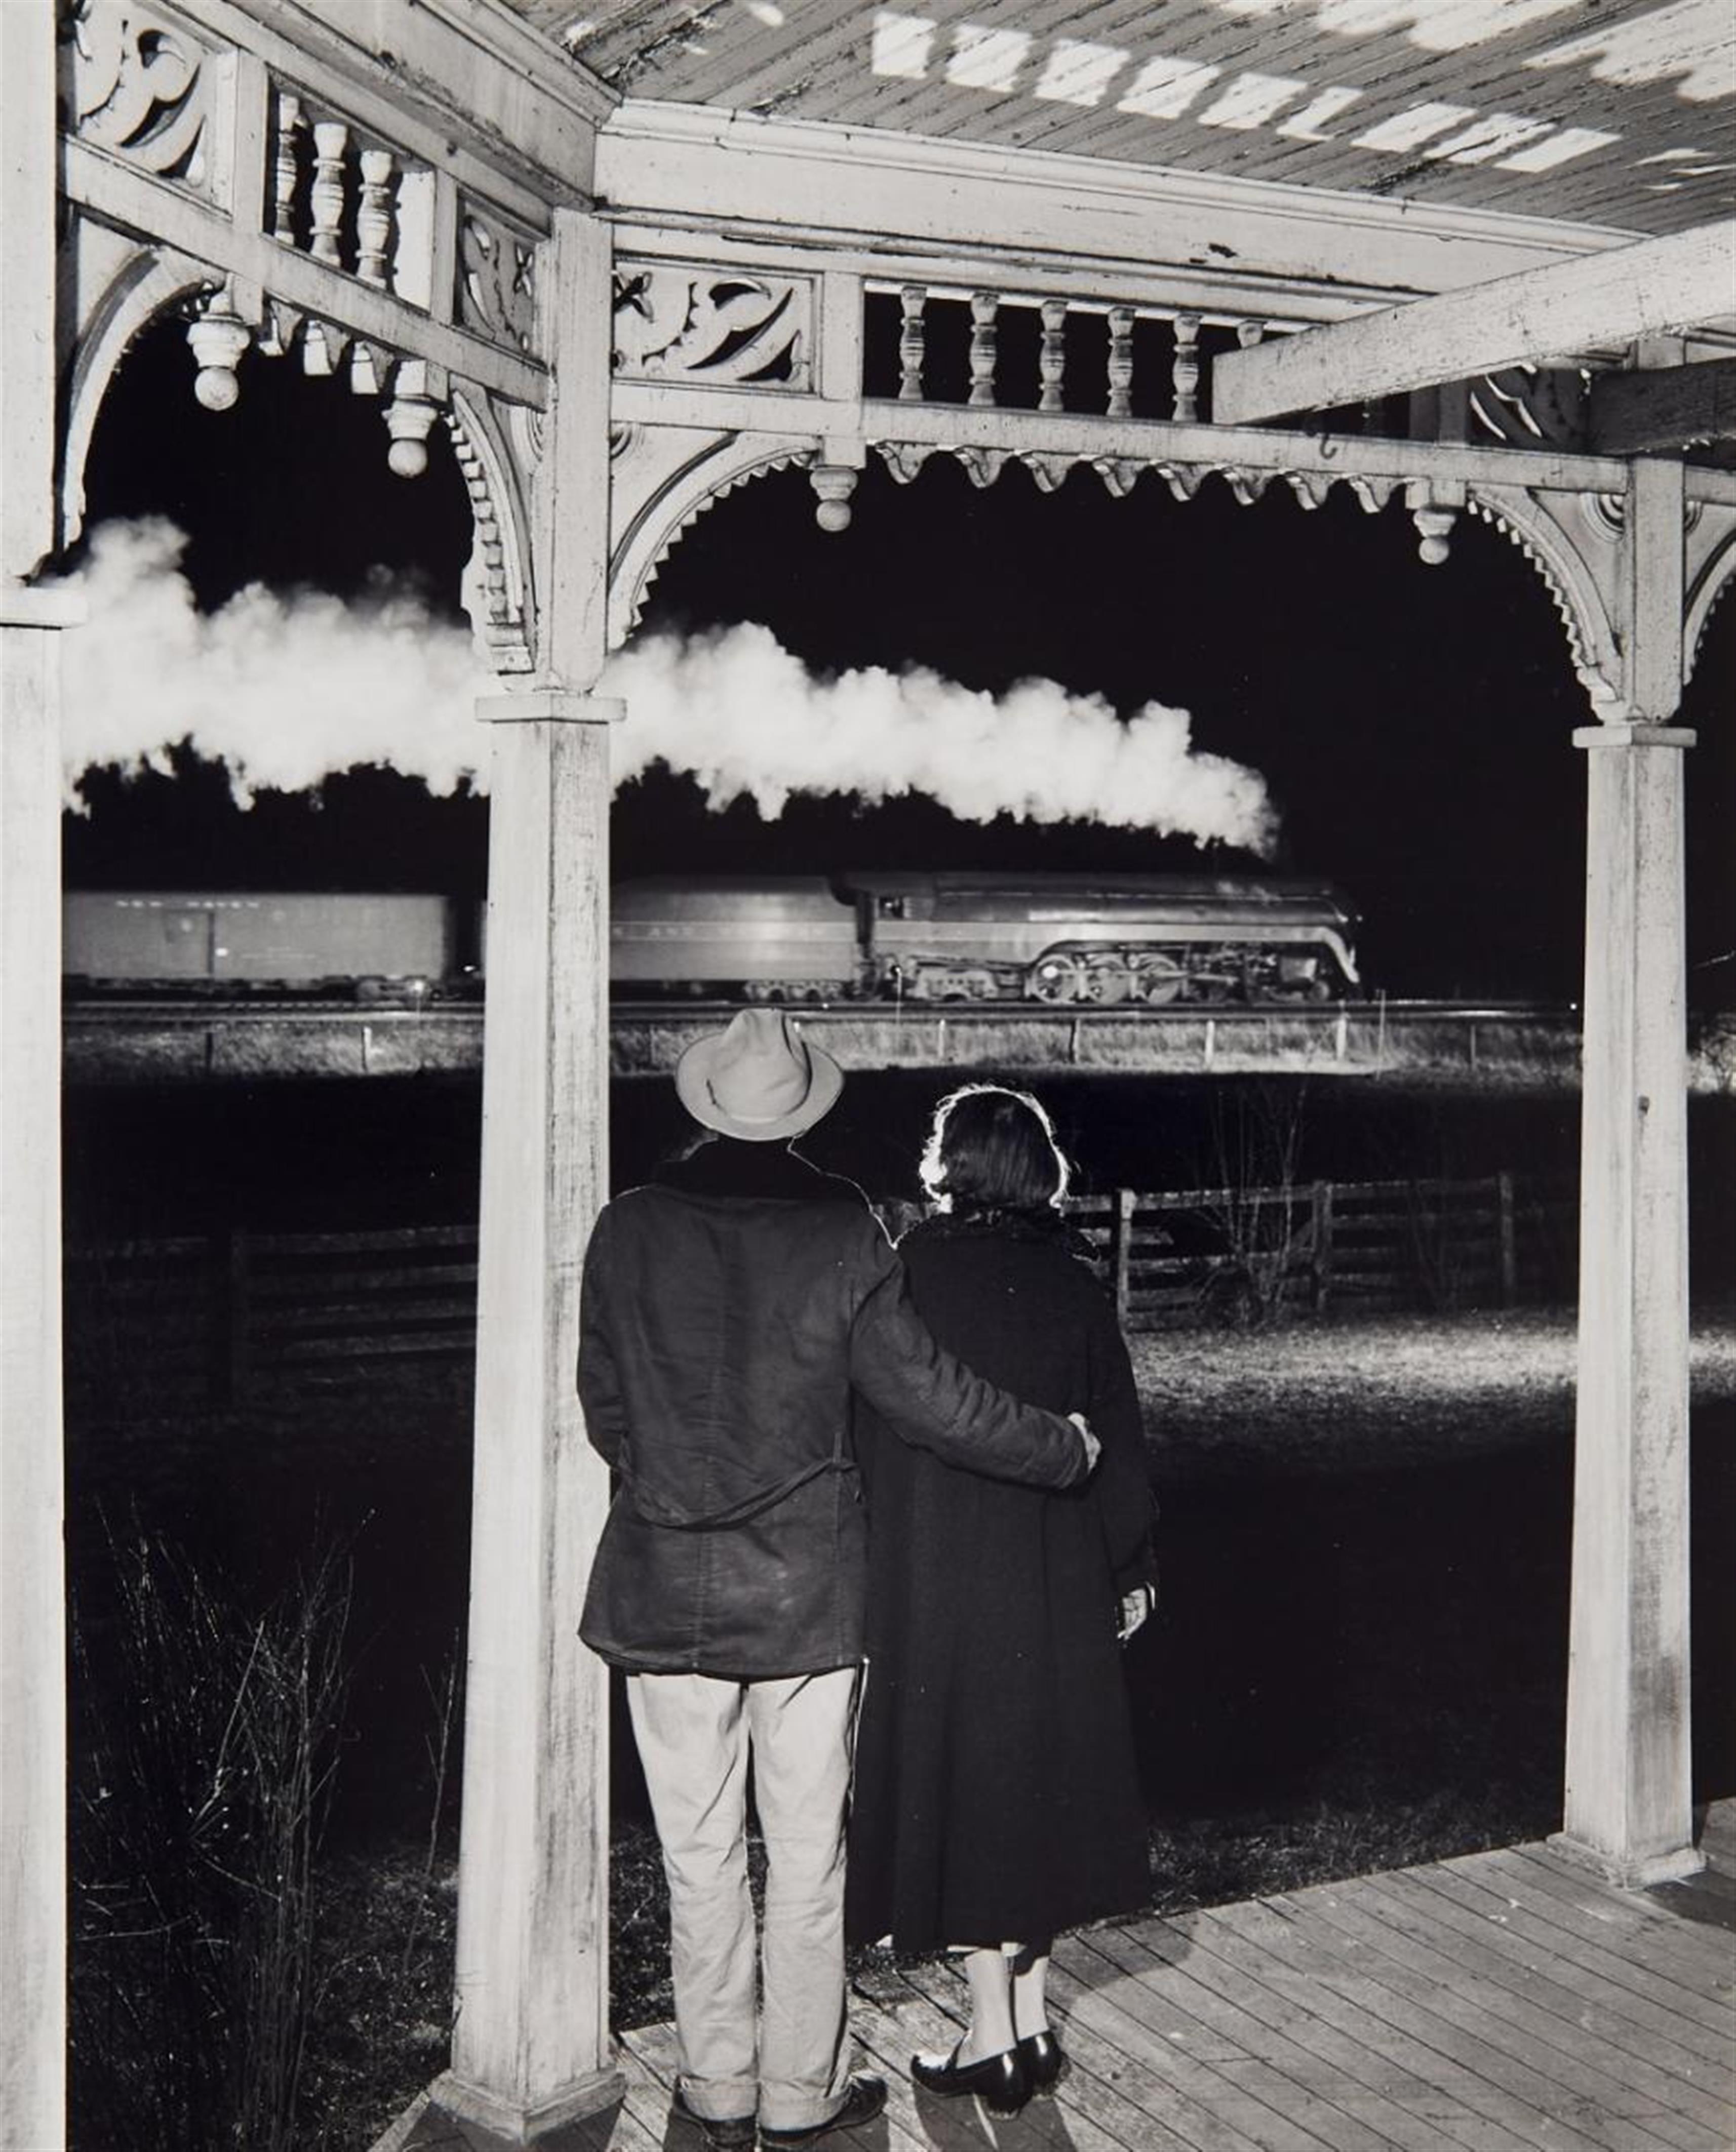 O. Winston Link - The Popes and the last stream passenger train, Max Meadows, Virginia - image-1